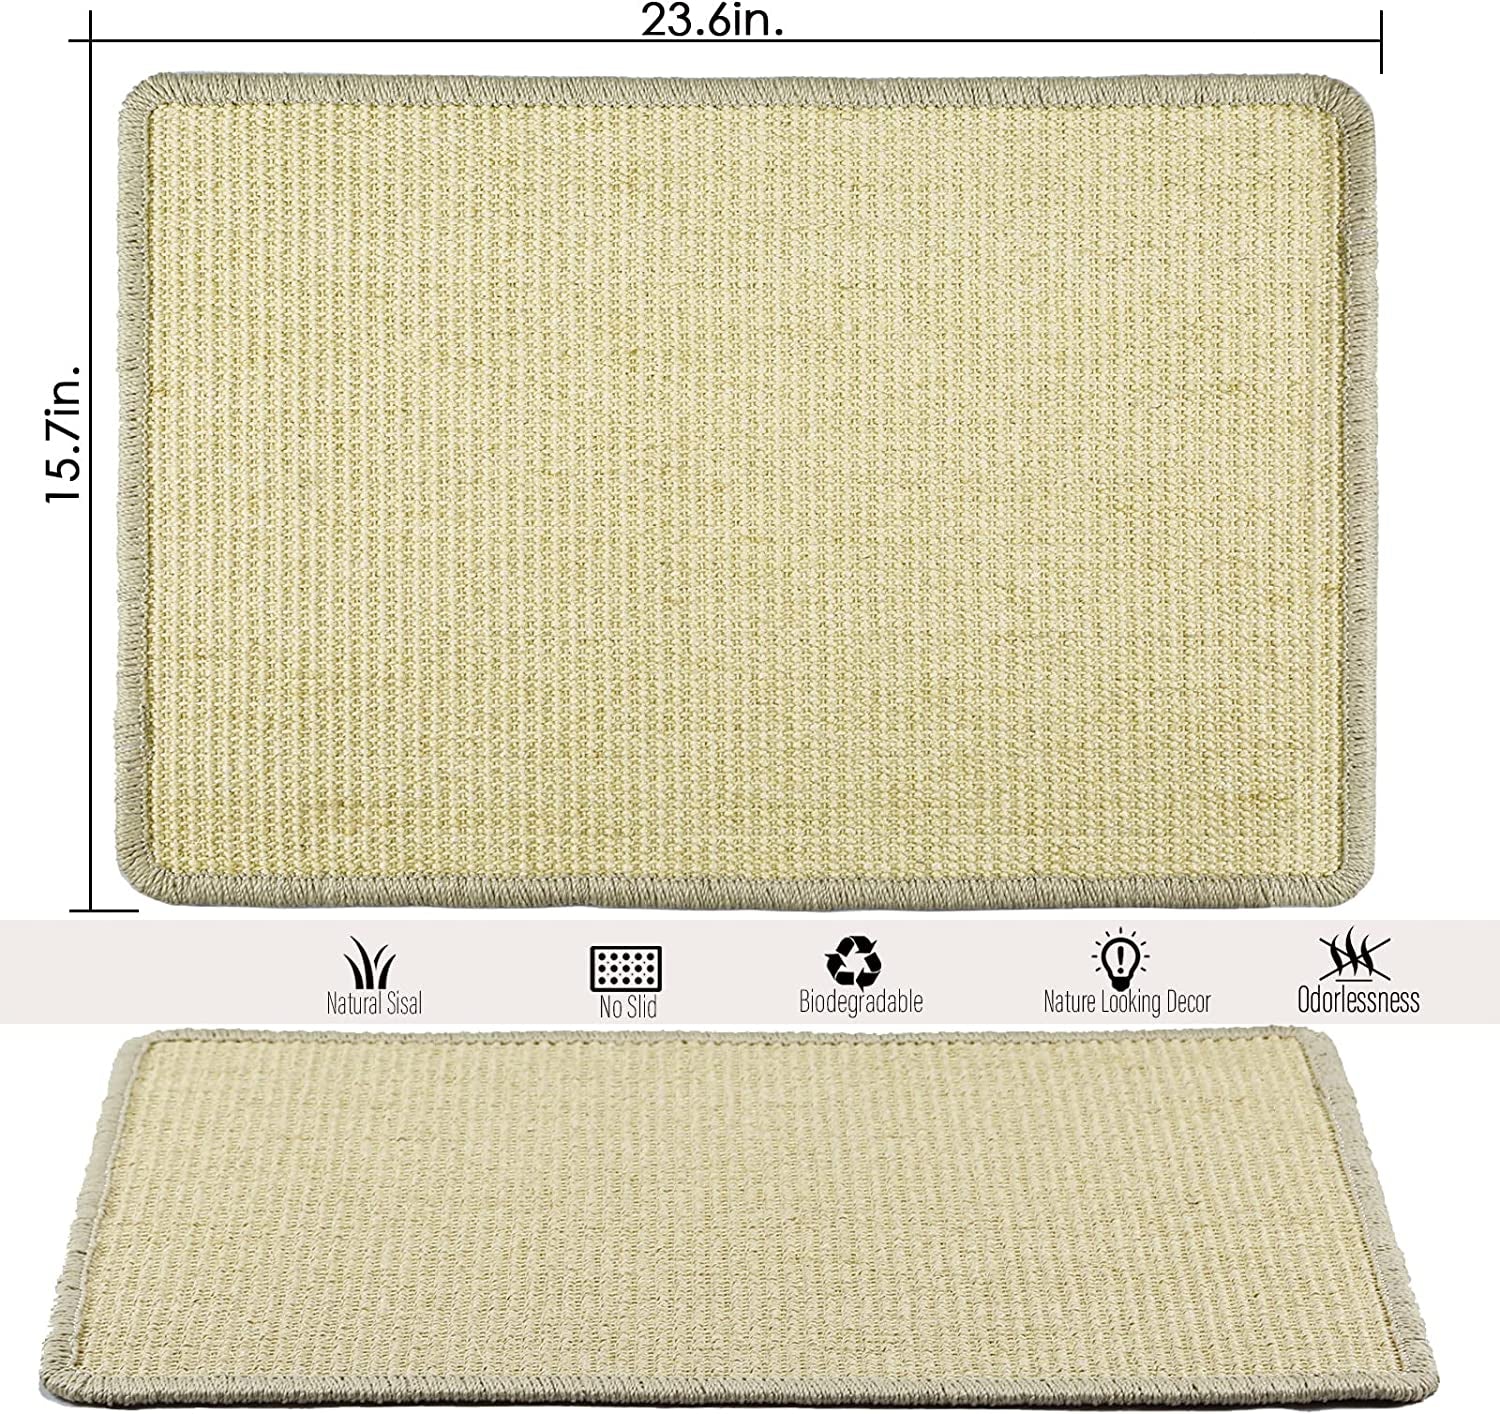 Cat Scratcher Mat, 23.6X15.7” Natural Sisal Scratching Mat with Velcro Tape,Stick on Floor and Wall Cat Scratch Pad Rug, Horizontal Cat Scratch Mat Protect Carpet and Sofa (Natural Color)